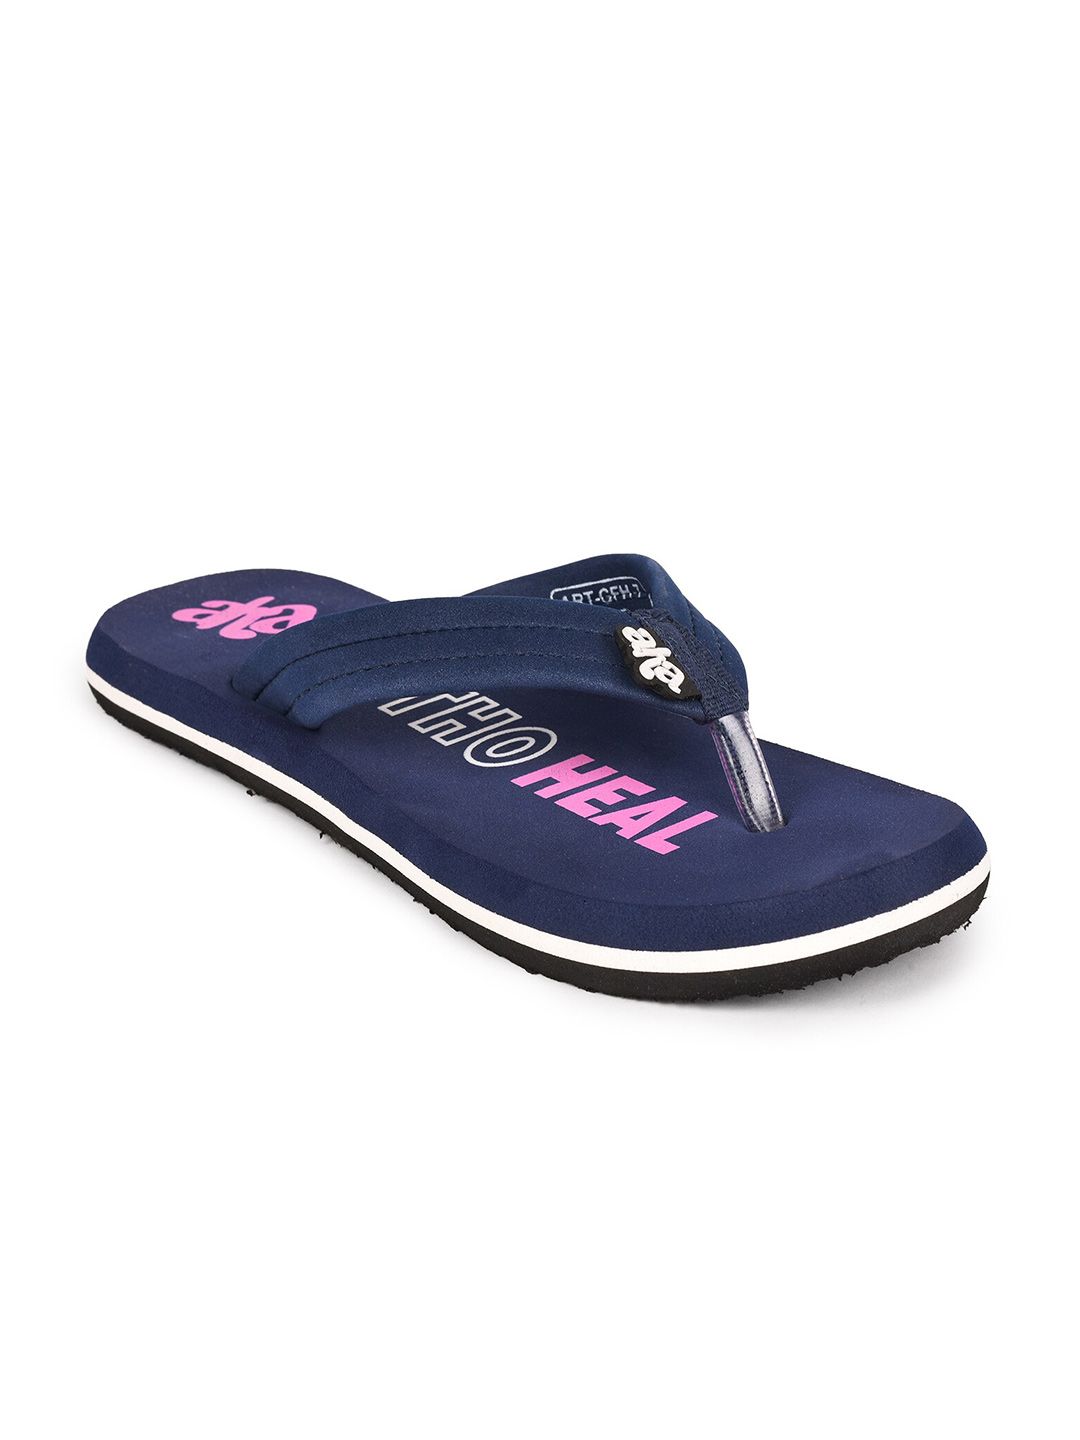 Liberty Women Blue & Pink Printed Rubber Slip-On Price in India